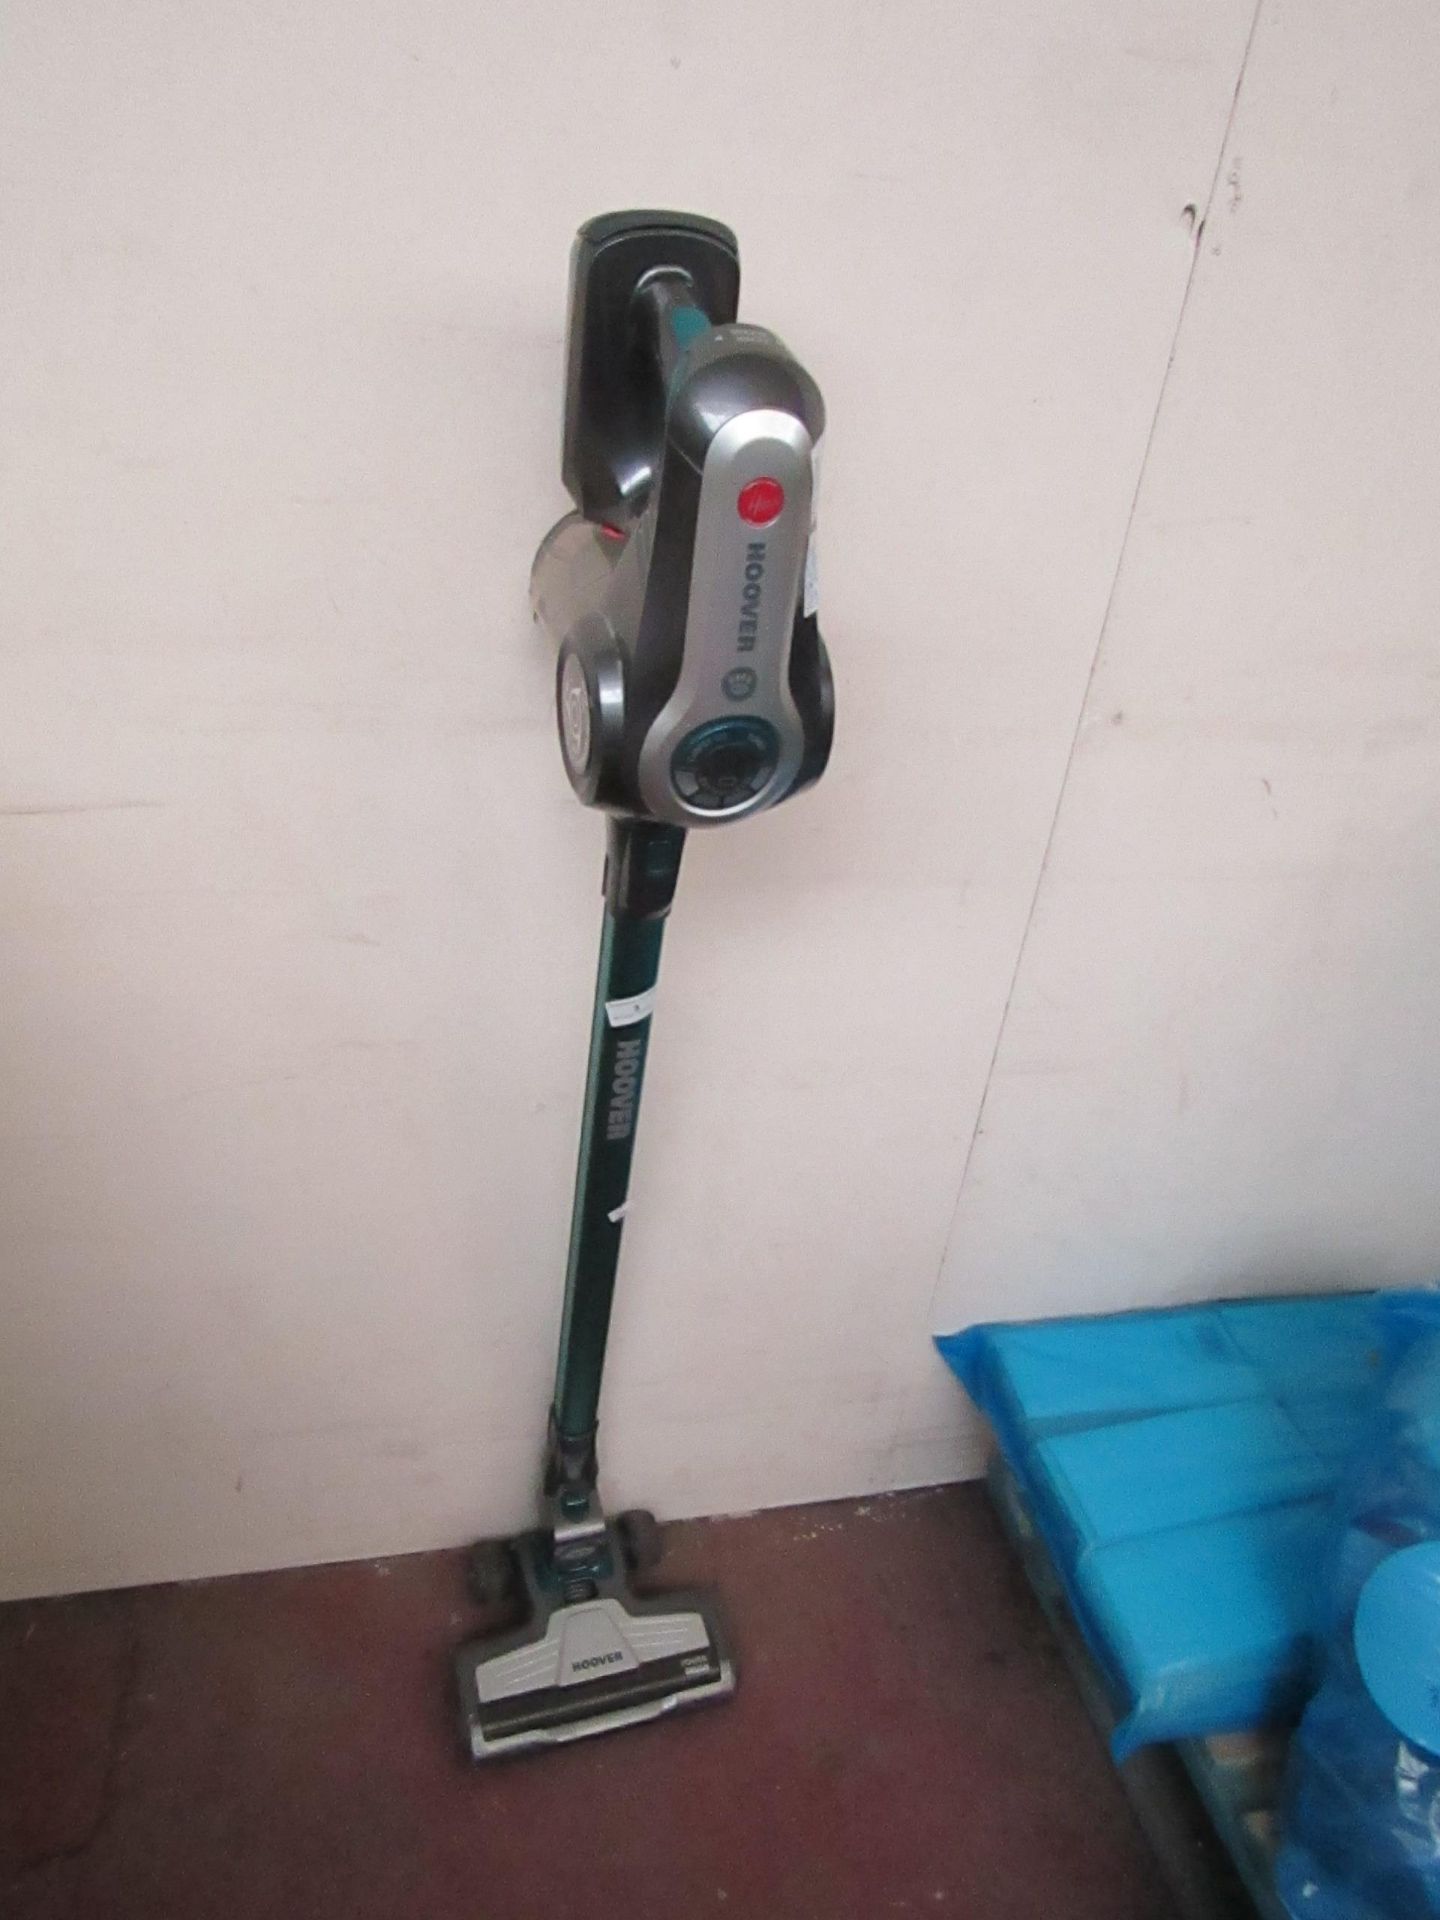 Hoover Discovery handheld cordless vacuum, tested working after a short charge, we haven't charged